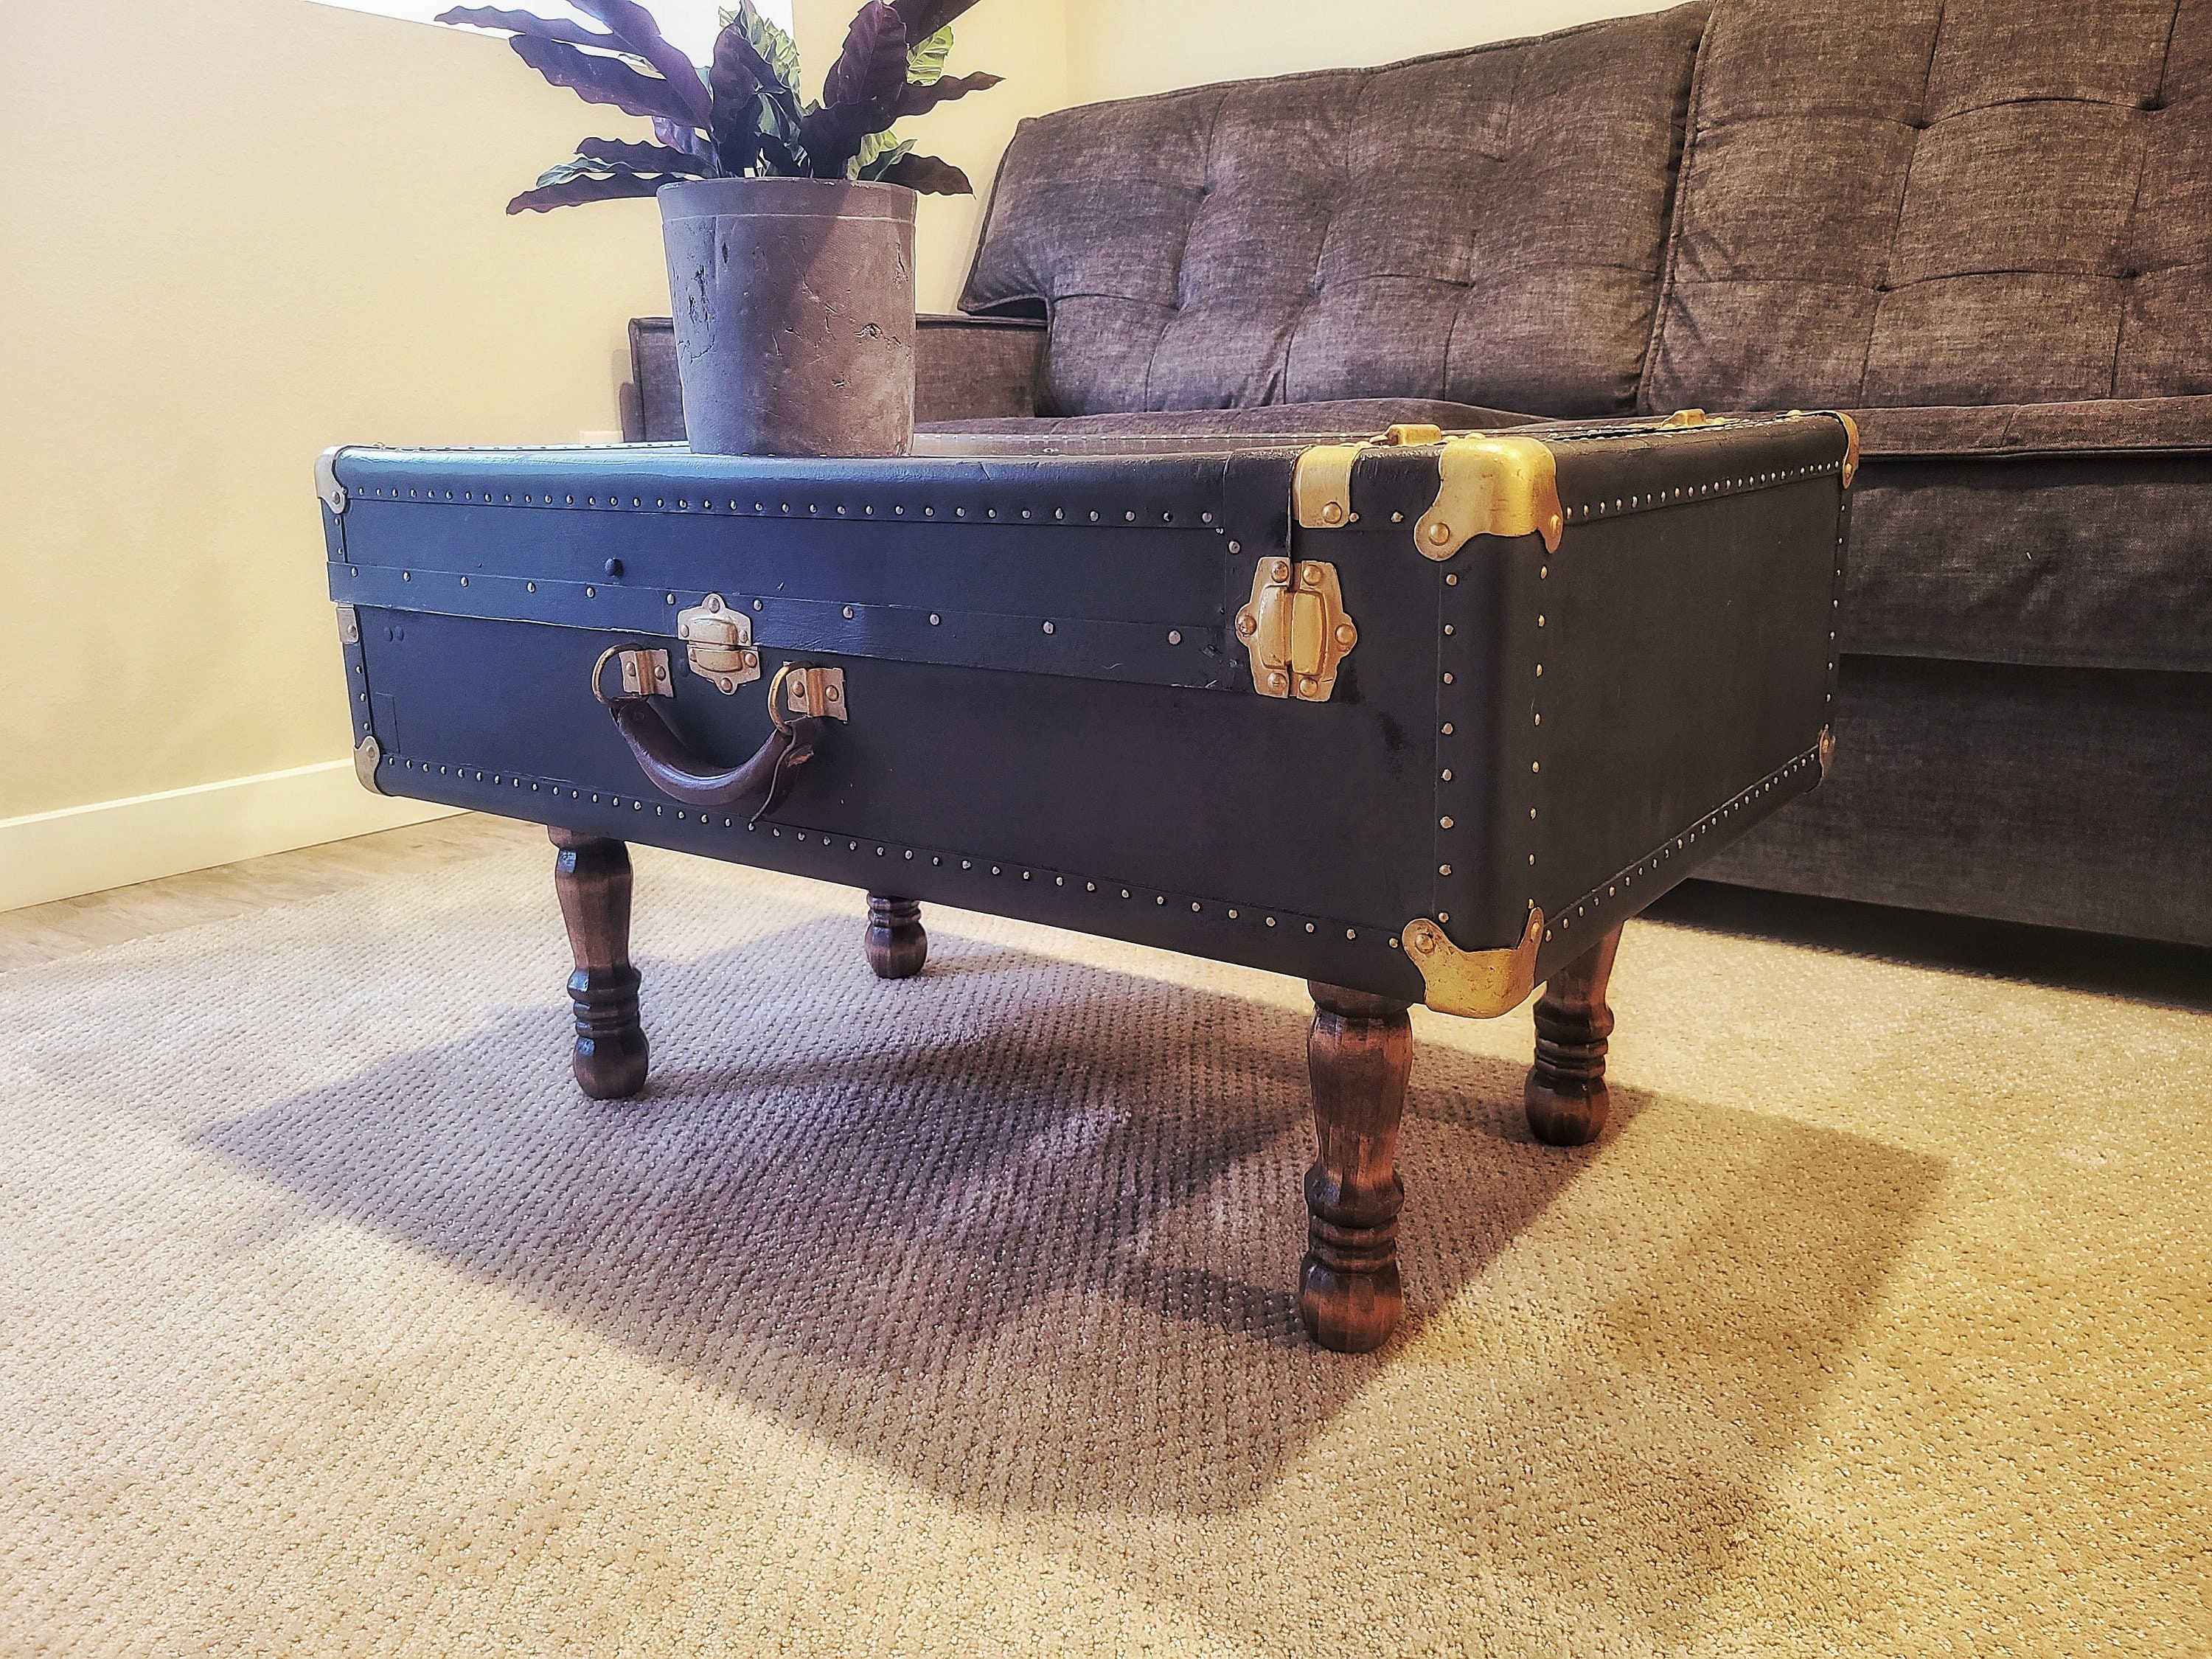 Antique Traditional American Steamer Trunk Coffee Table by Oshkosh